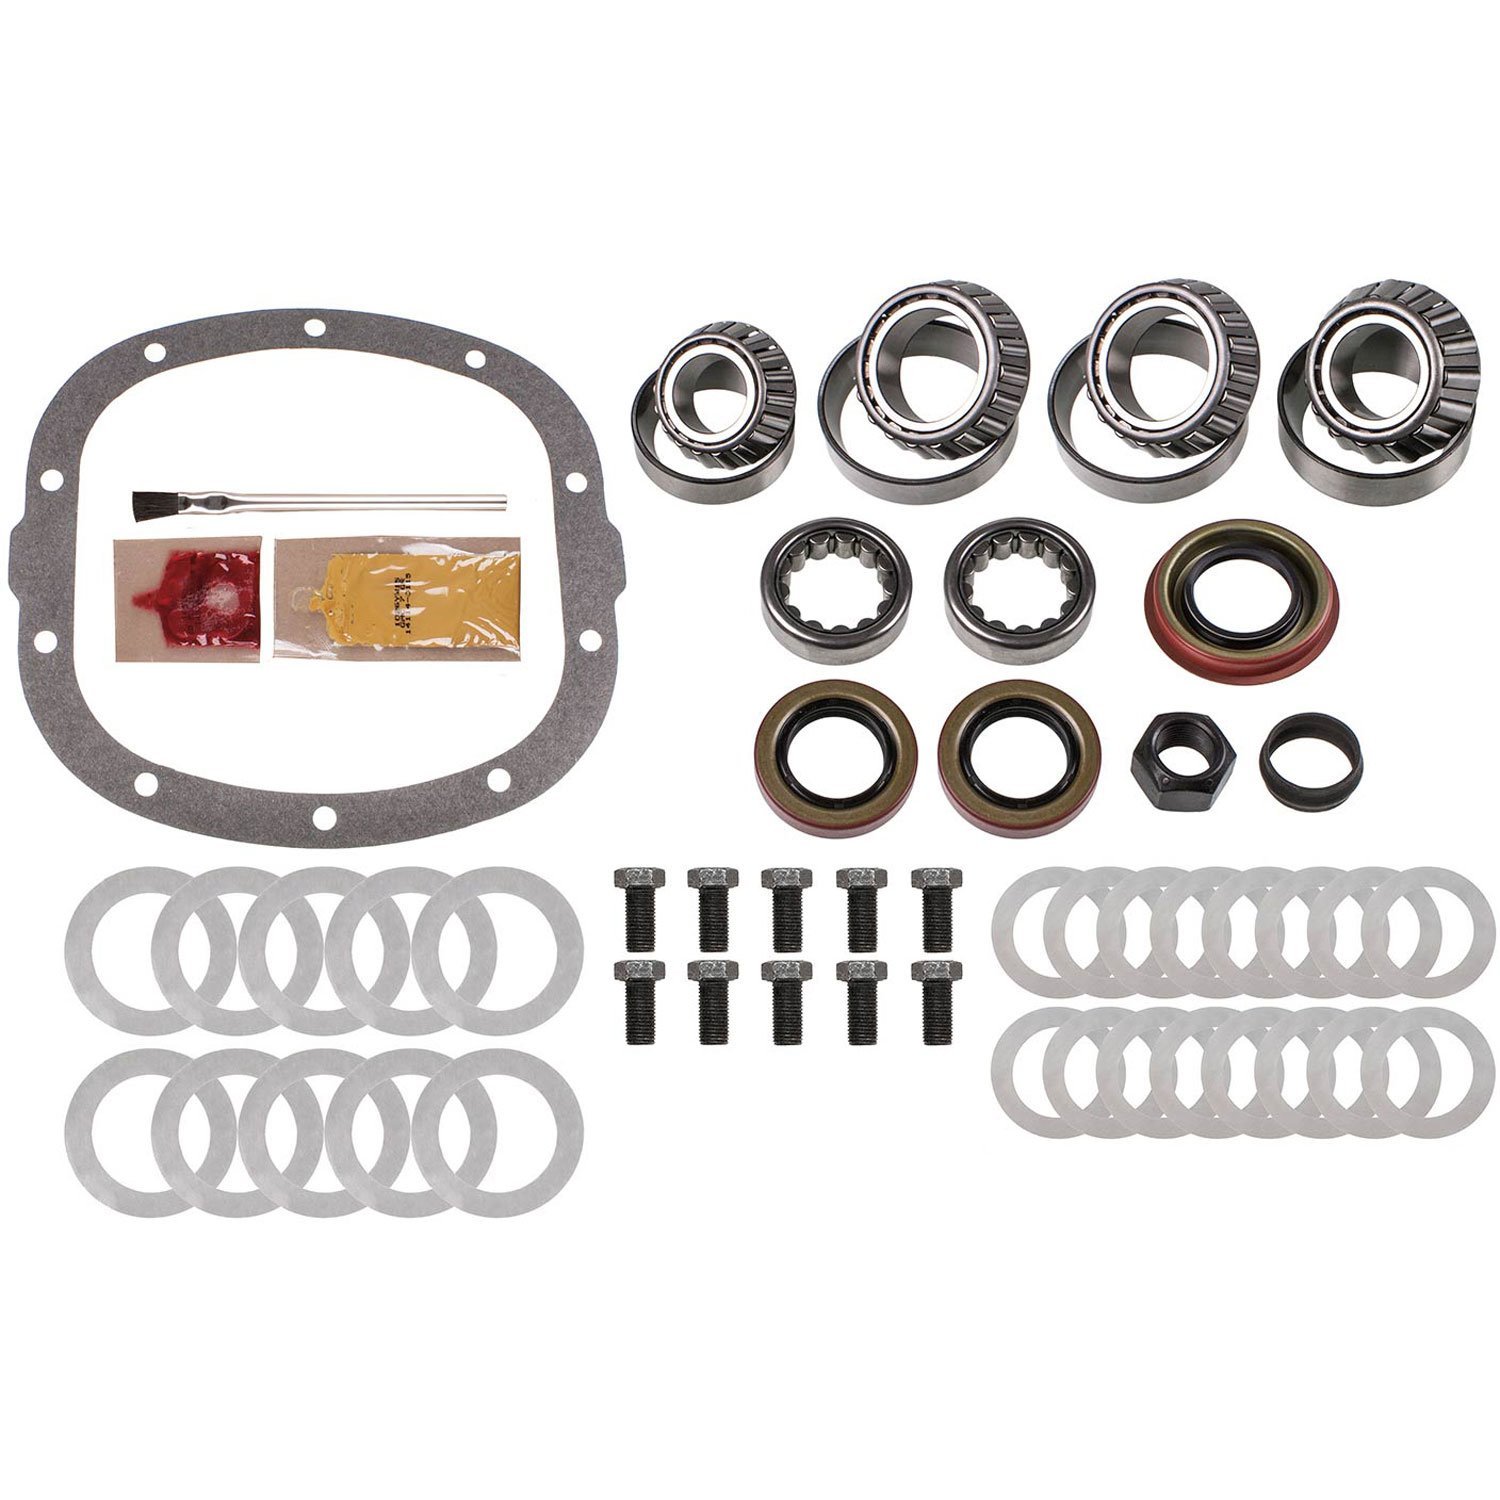 Differential Super Bearing Kit GM 7.5 in. & GM 7.625 in. 10-bolt - Timken Bearings